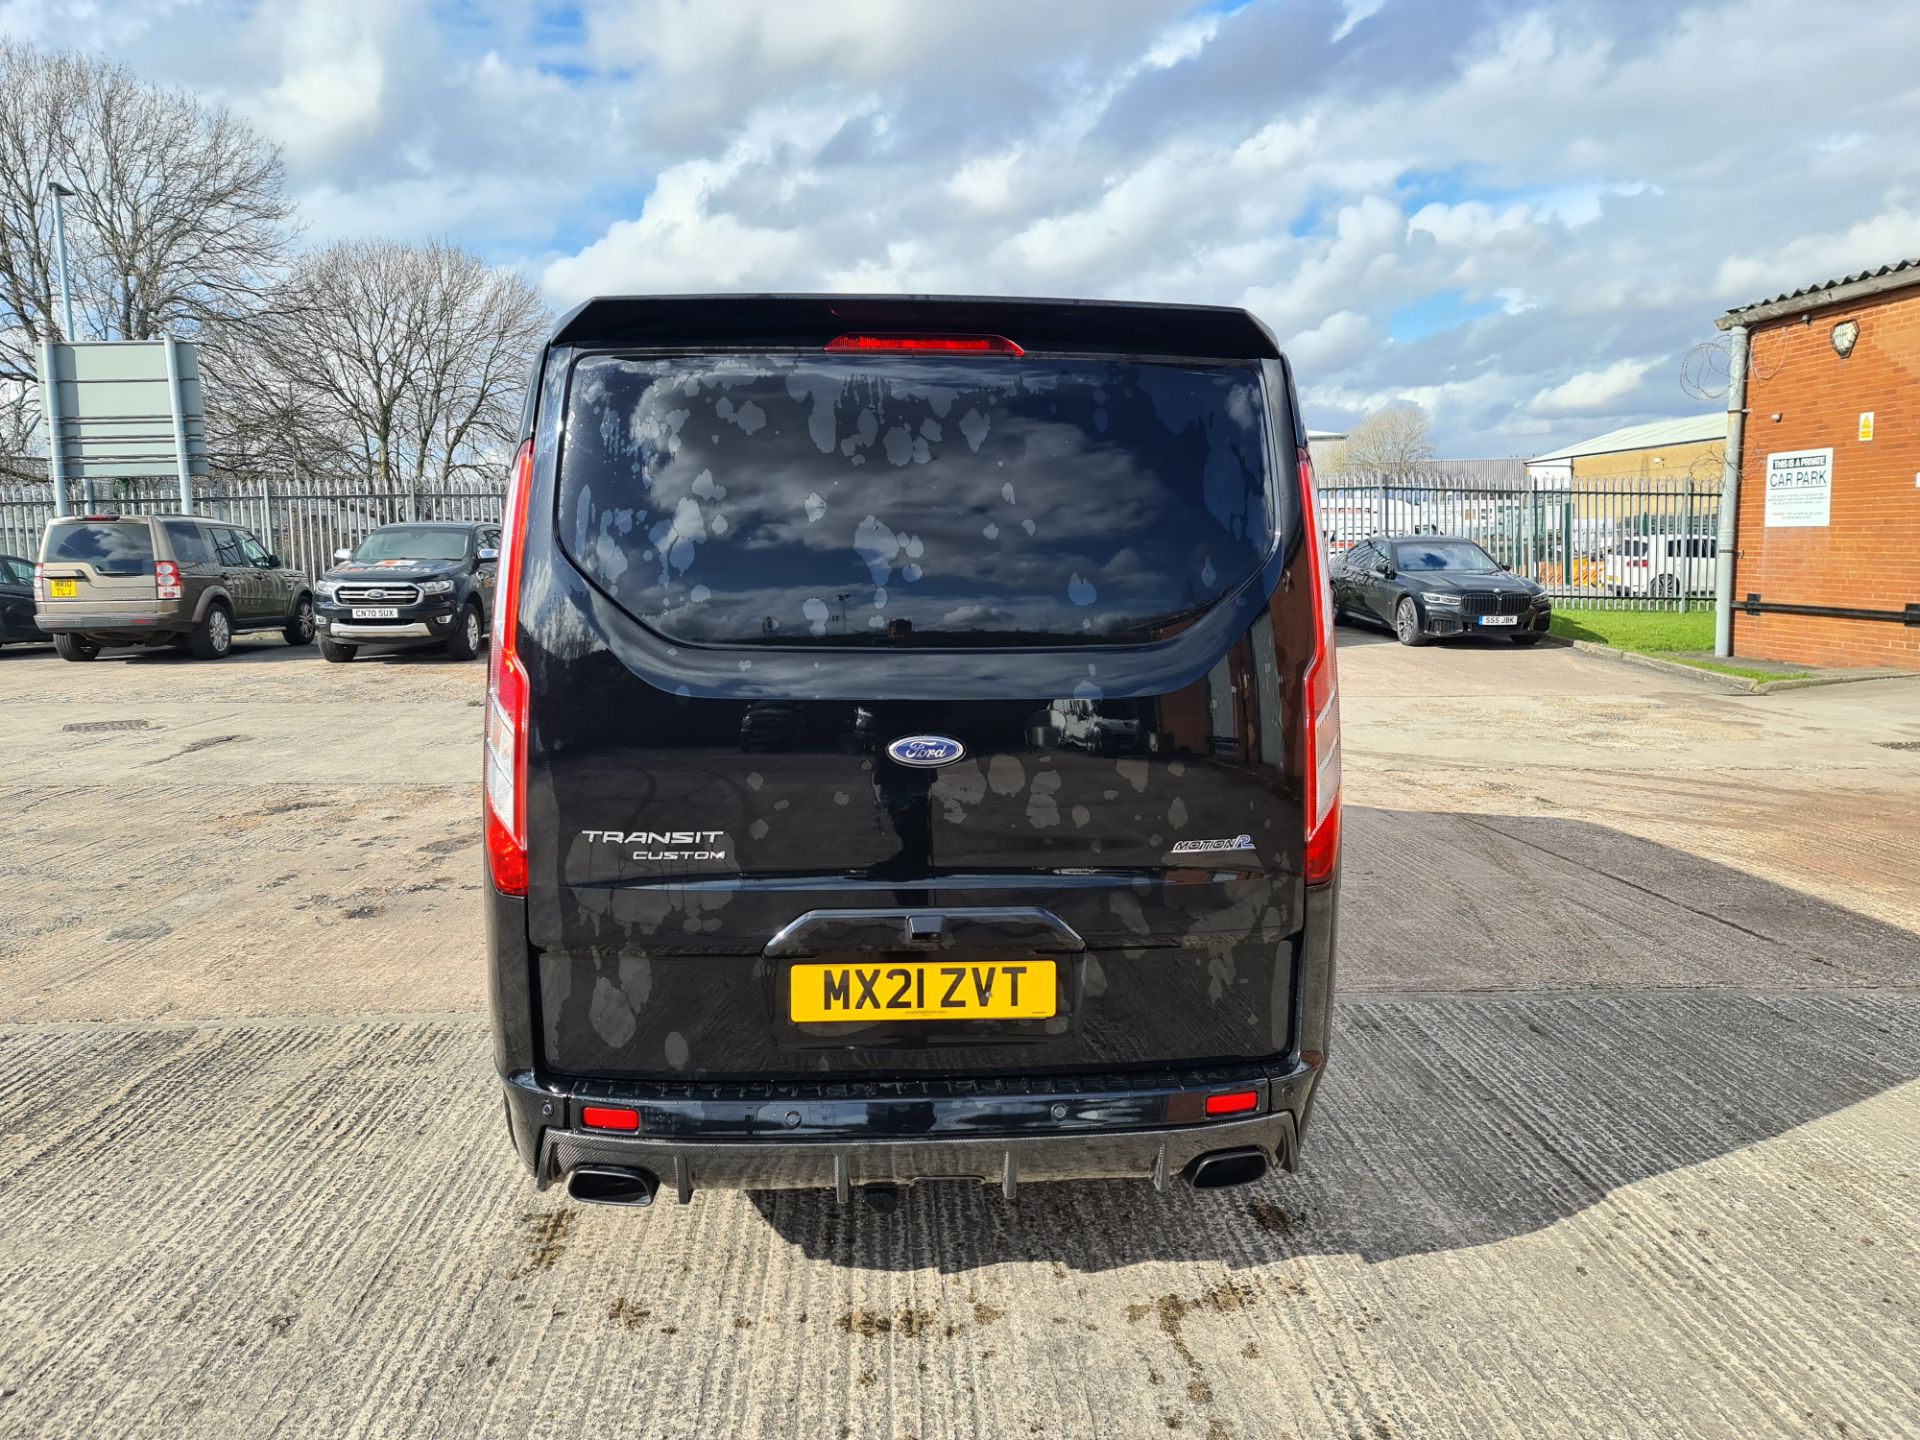 2021 Ford Transit 320LMTD Motion R panel van, auto gearbox, Ultra High Spec - Image 4 of 102